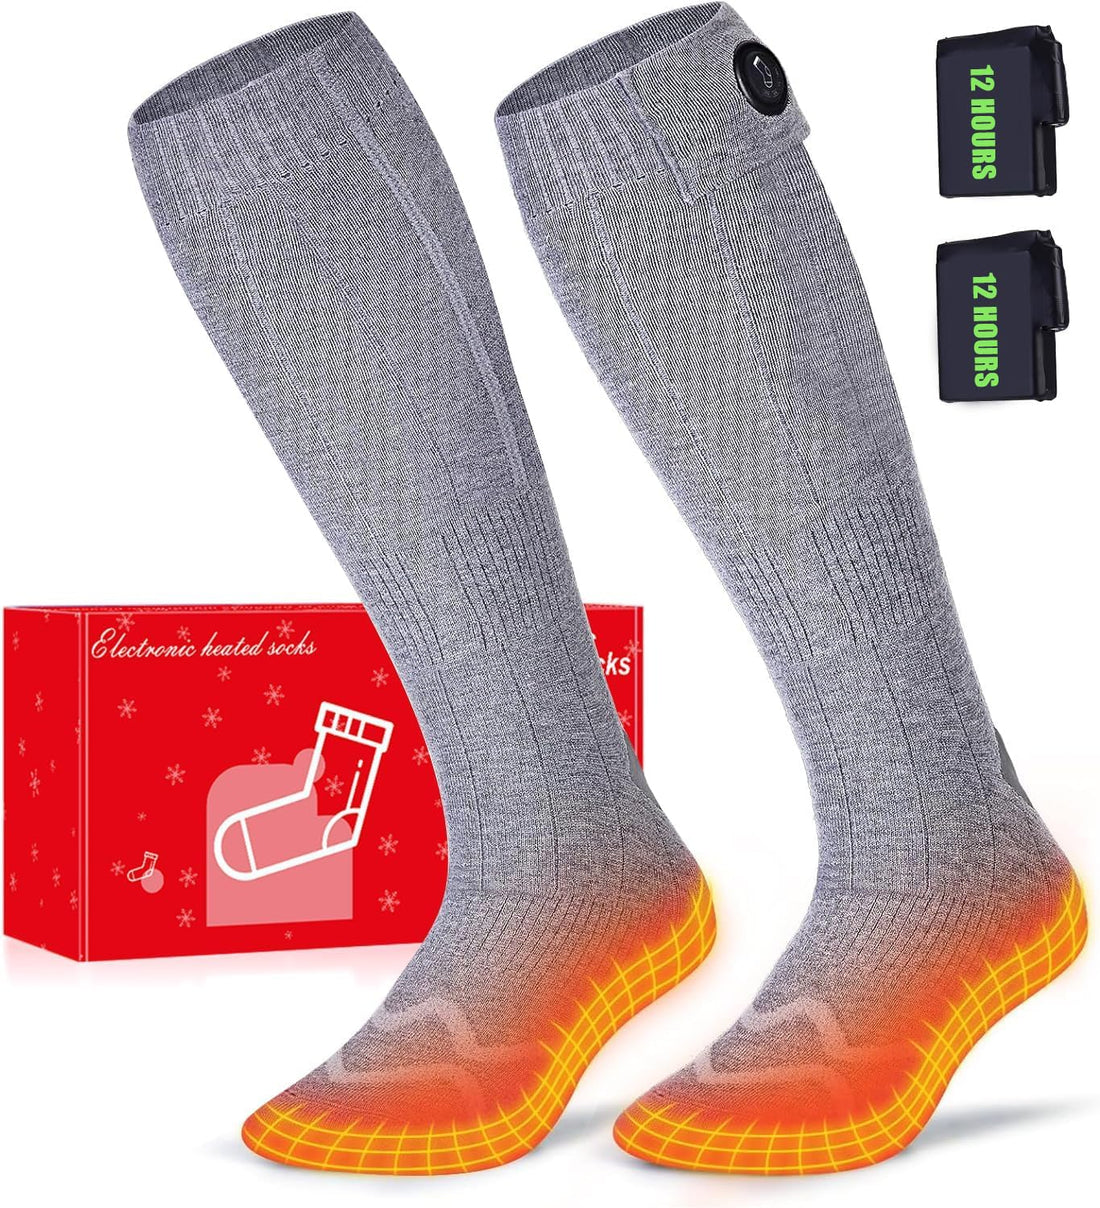 Wototic Heated Socks, 2023 Upgraded Rechargeable 10Hrs Heating Heated Socks for Men Women with 6000mAh Battery, Electric Heated Socks for Outdoors, Hunting, Golf, Camping, Warm Gifts-L Size